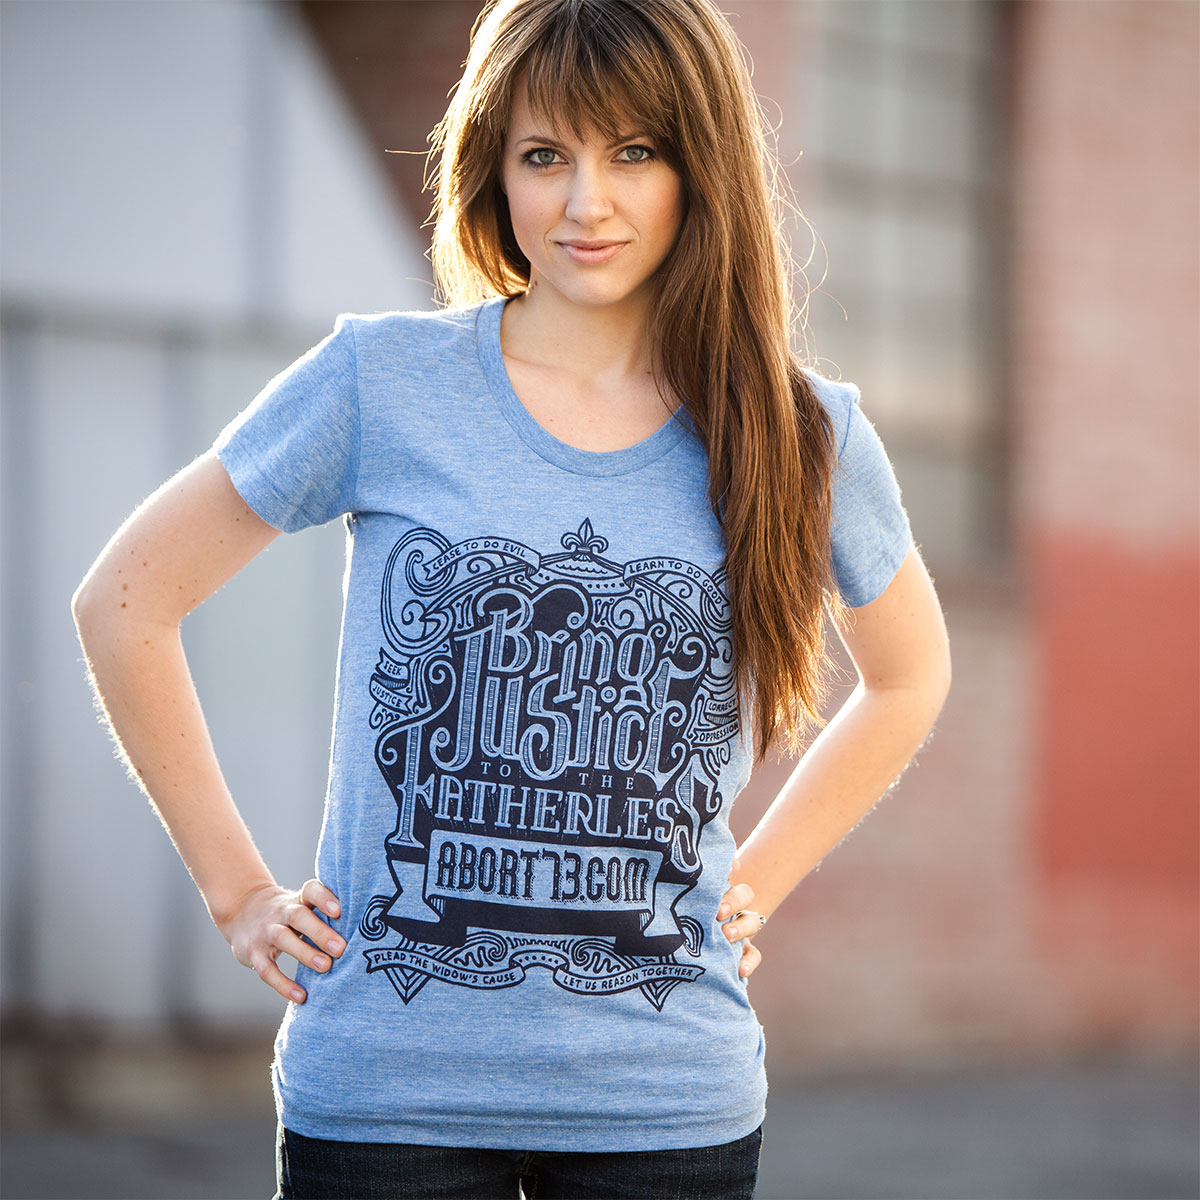 Bring Justice to the Fatherless (Abort73 Girls 50/25/25 T-shirt)